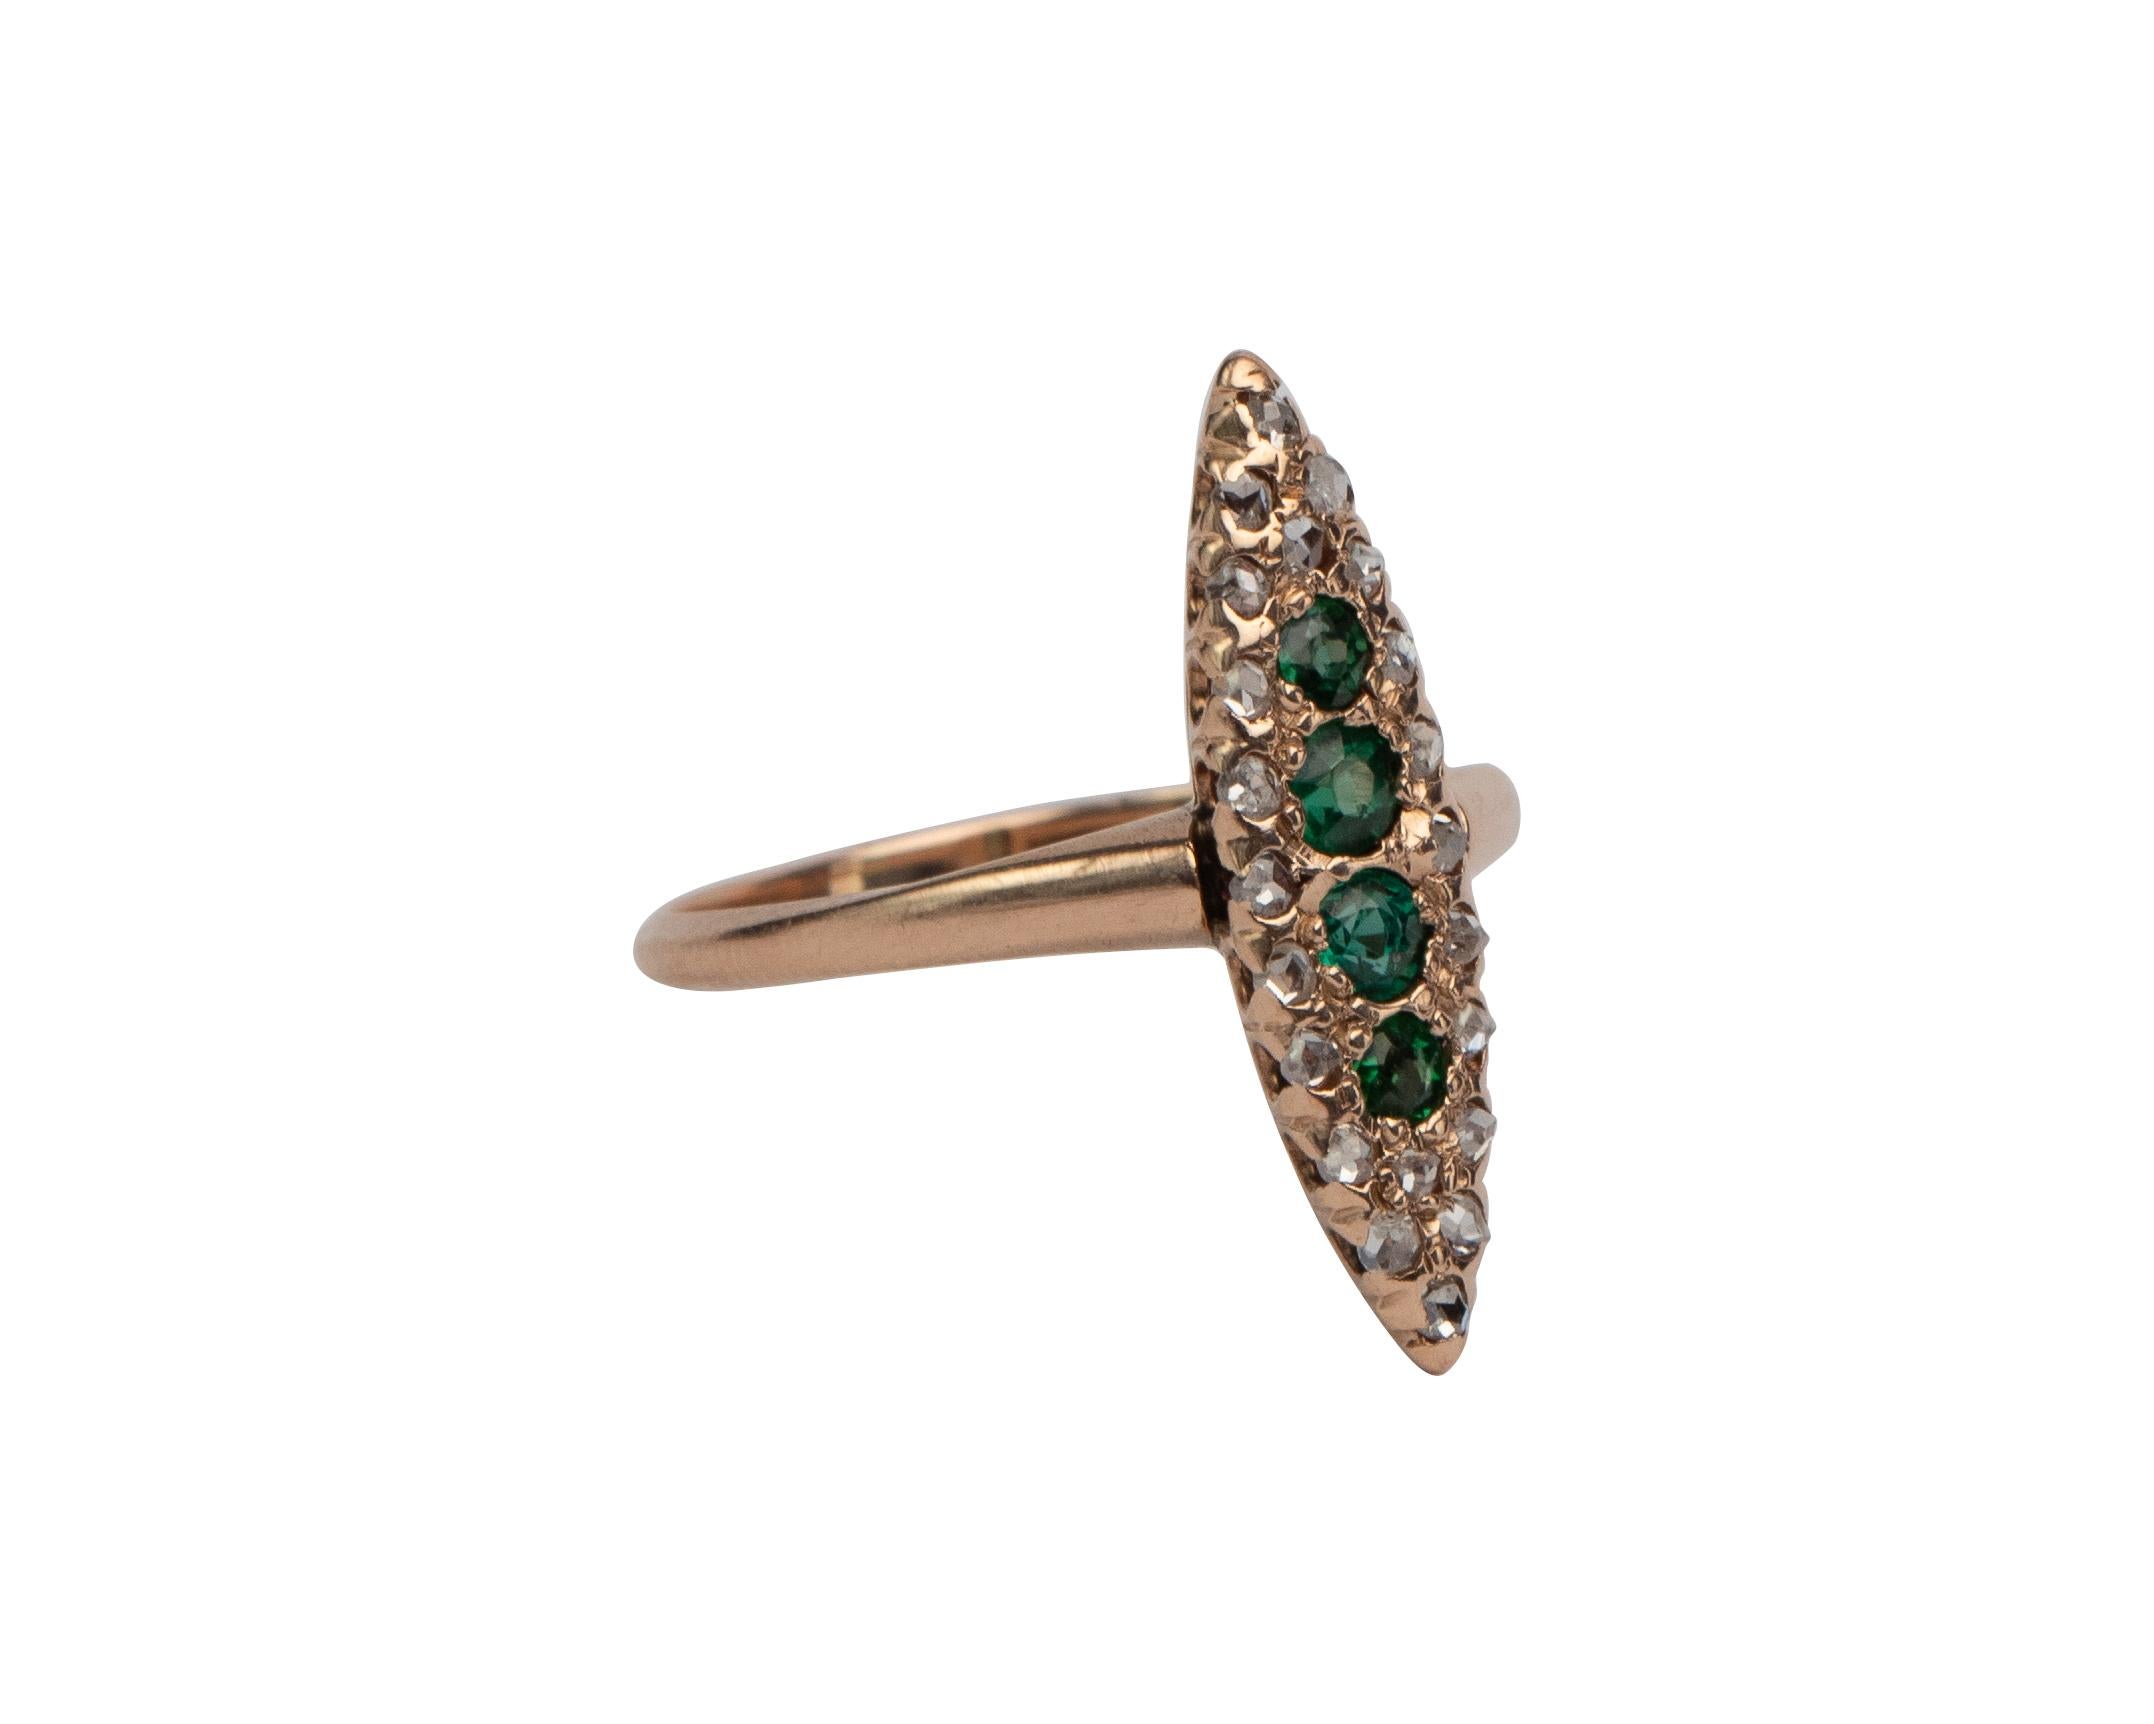 This is a fantastic example of a victorian era navette marquise-shaped ring. It is crafted in a beautiful rosey toned yellow gold and the center features four intense green emeralds of the finest quality. The rubies are surrounded by a border of